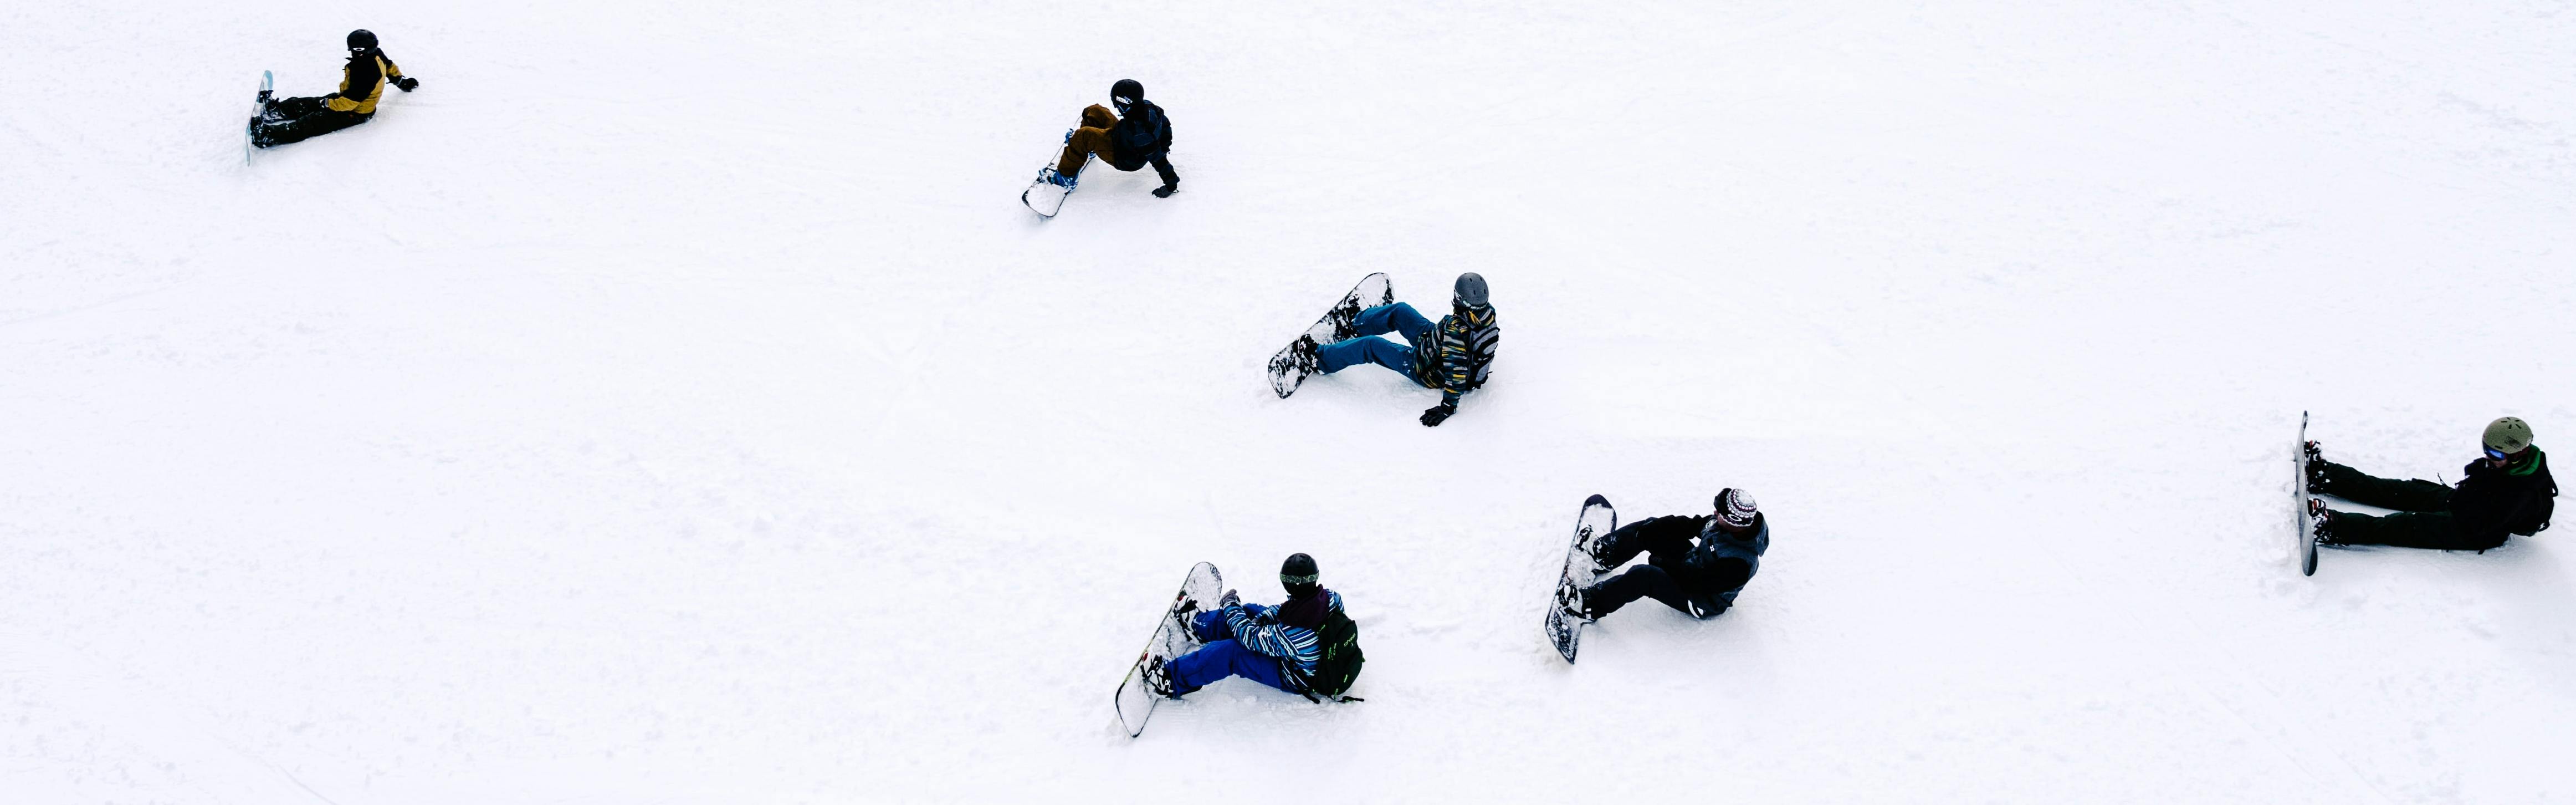 Six snowboarders sit on the snow, scattered around